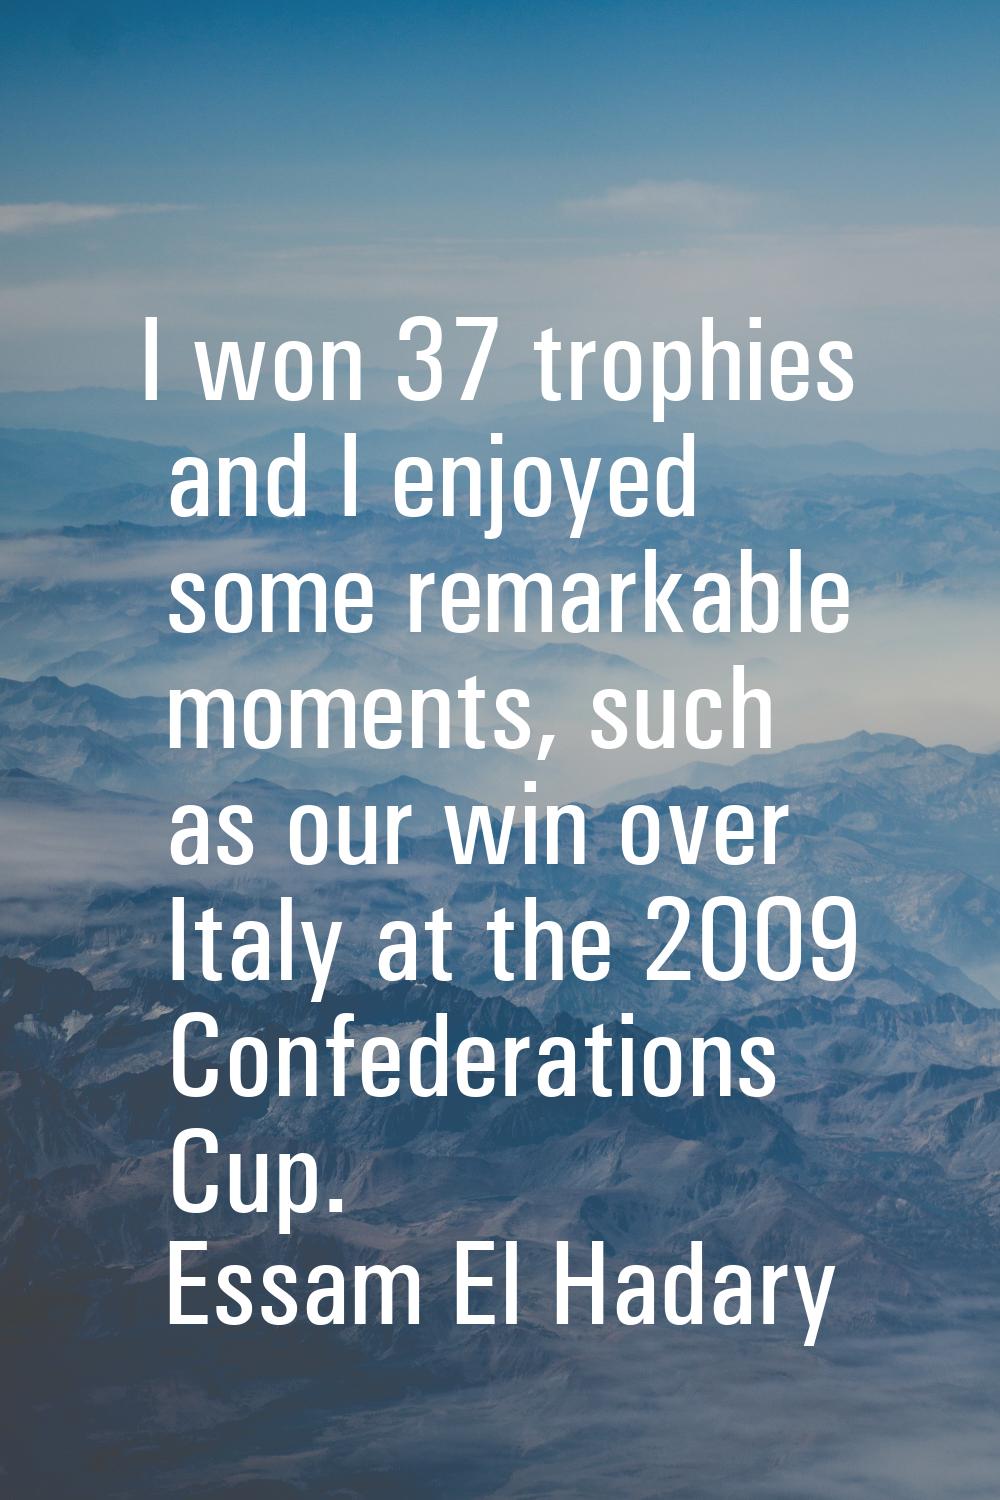 I won 37 trophies and I enjoyed some remarkable moments, such as our win over Italy at the 2009 Con